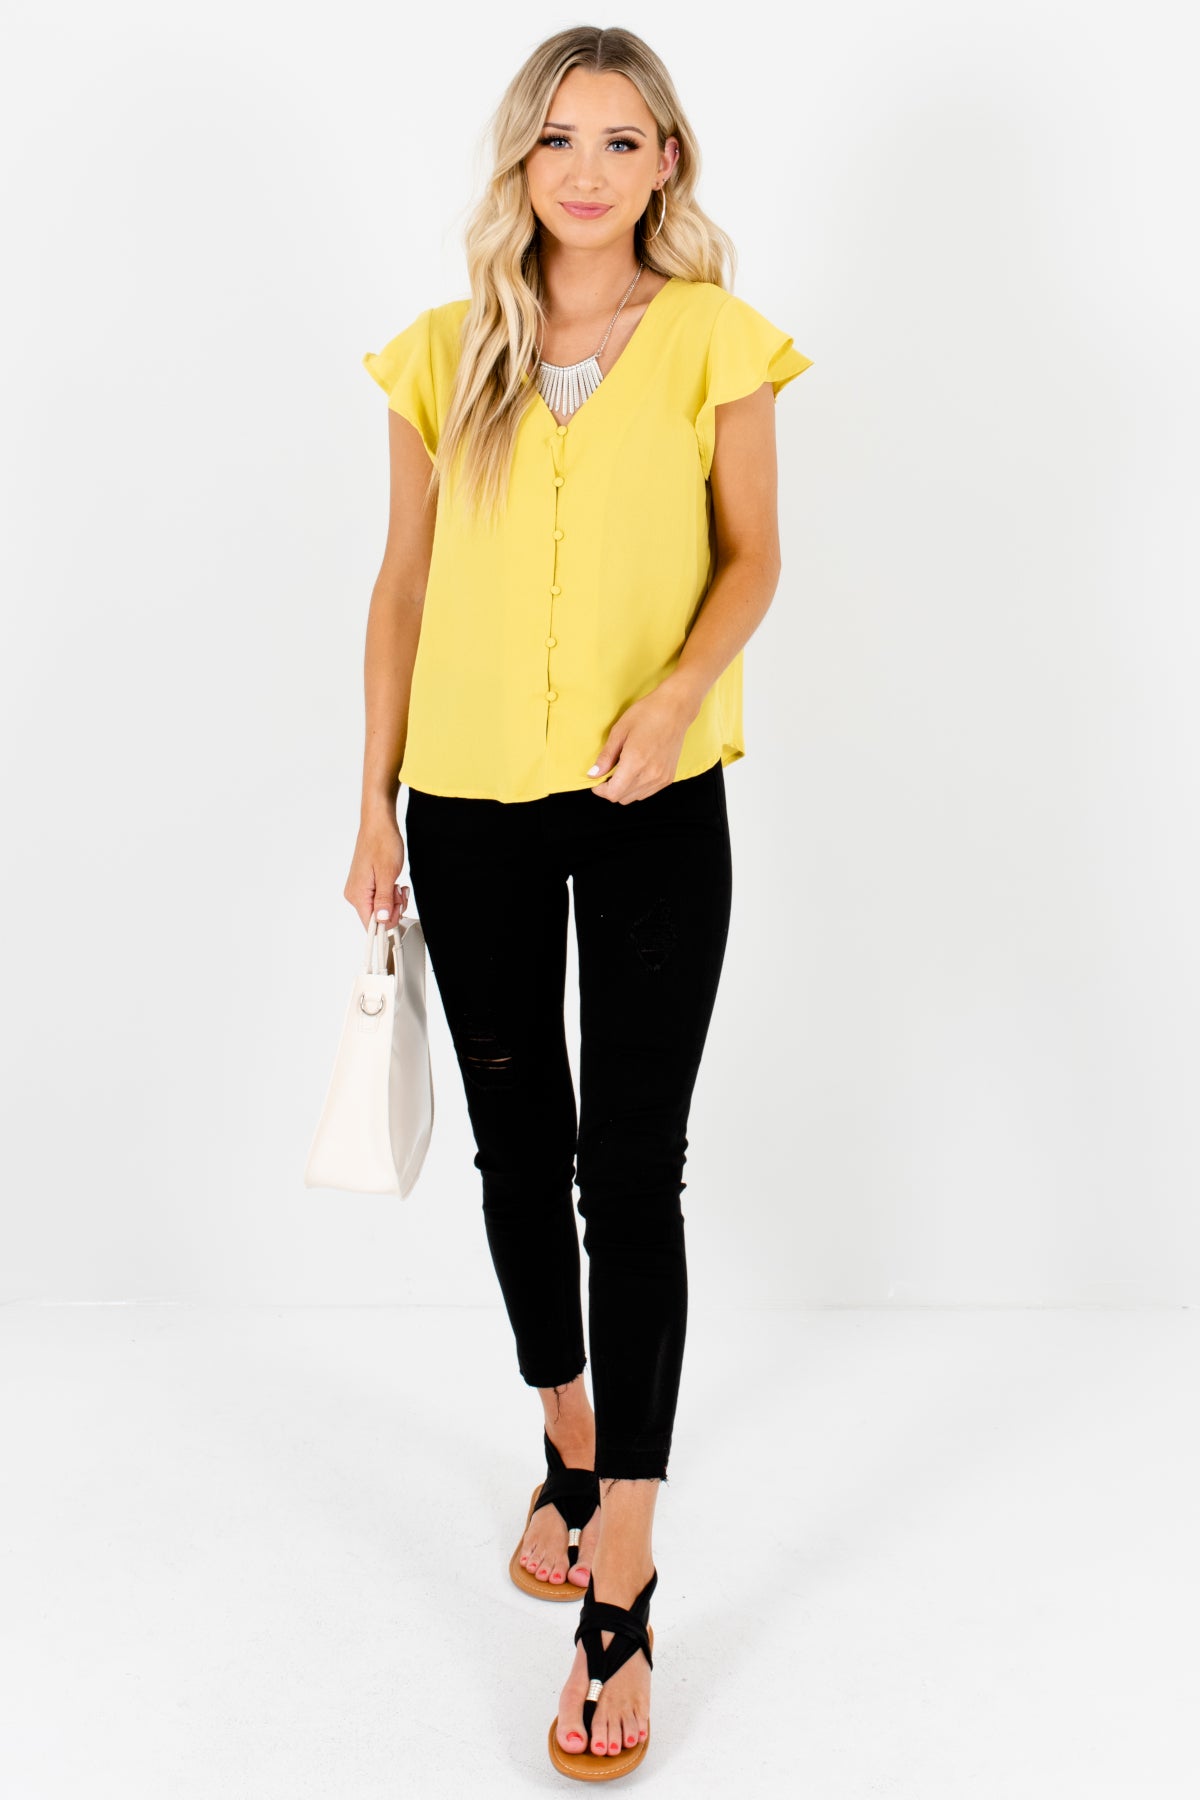 Chartreuse Yellow-Green Button-Up Blouses Affordable Online Boutique